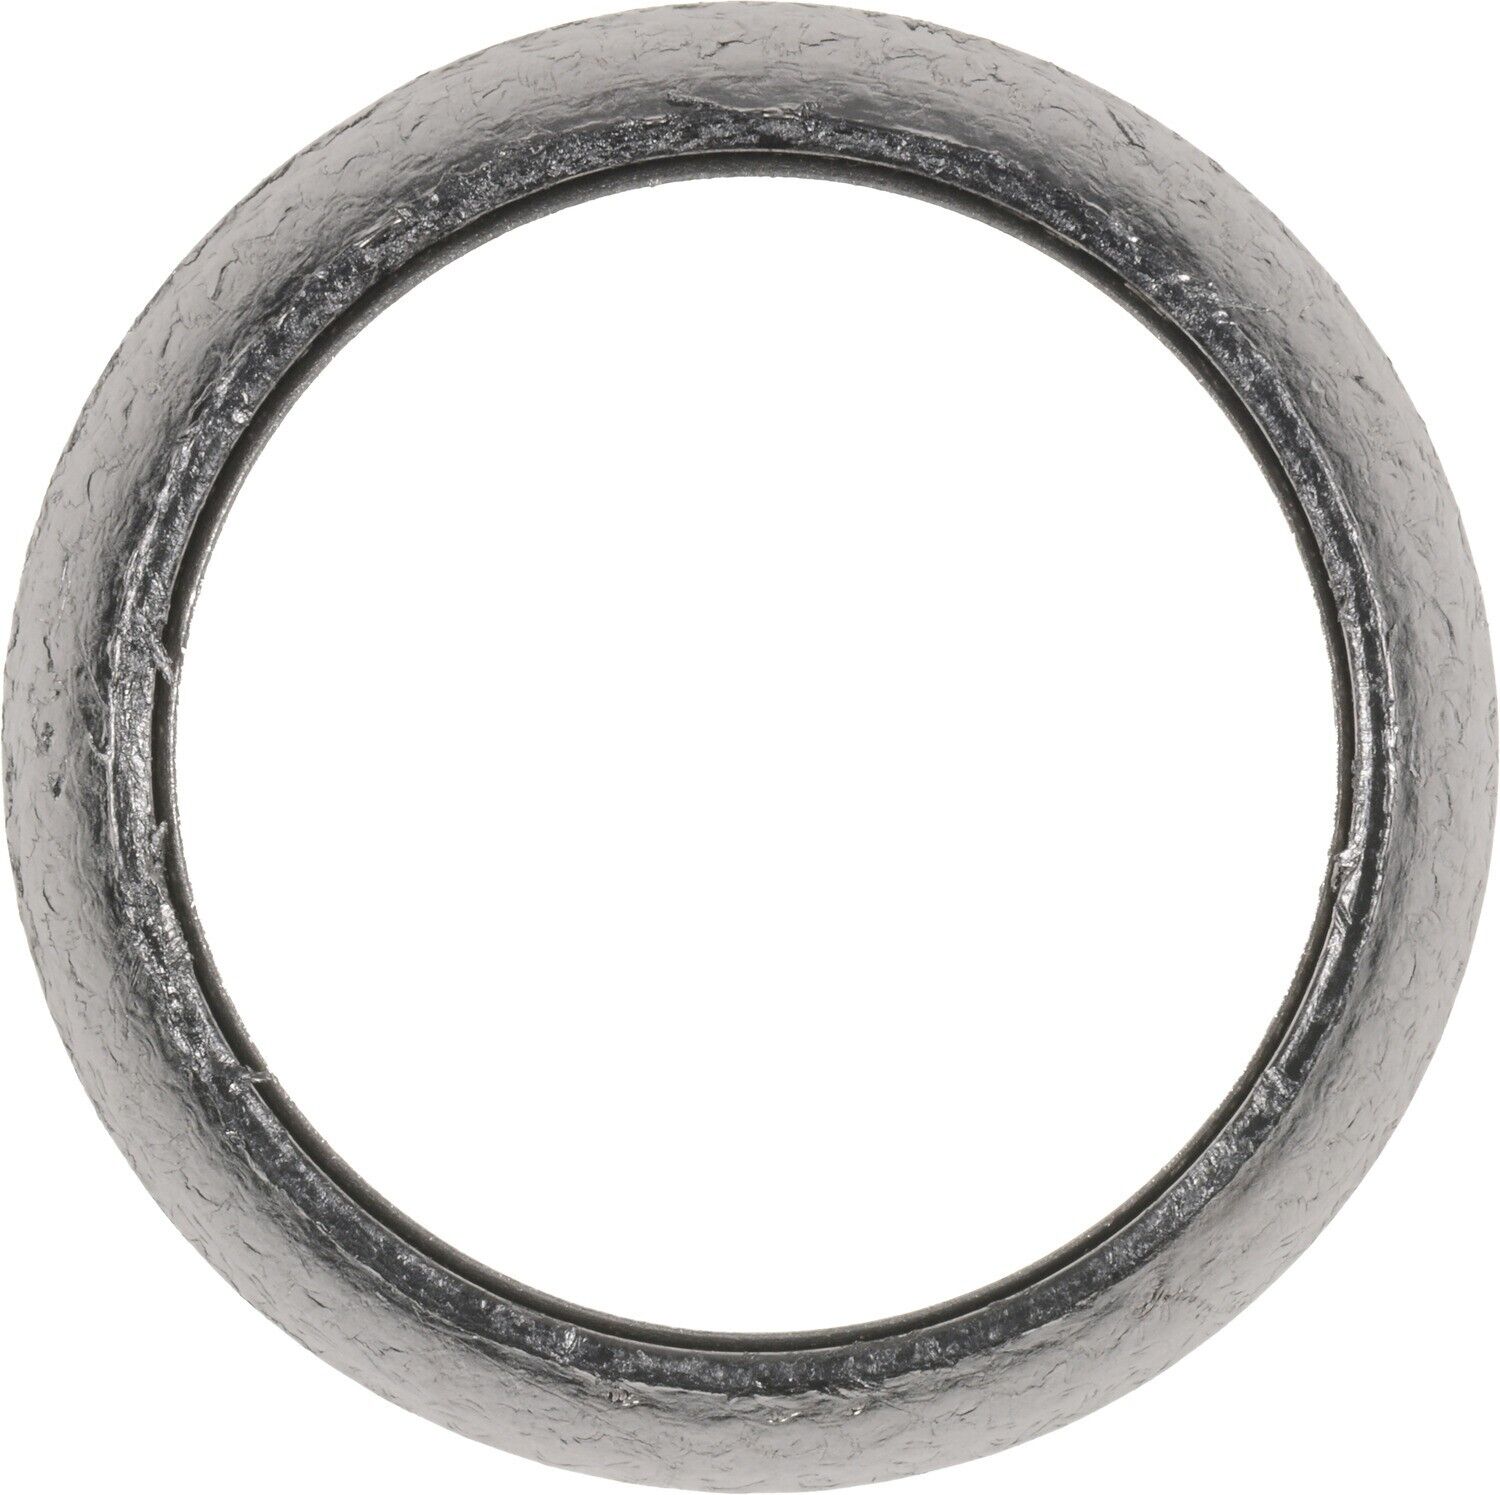 Exhaust Pipe Flange Gasket for H1, Express 2500, Express 3500+More 71-13655-00